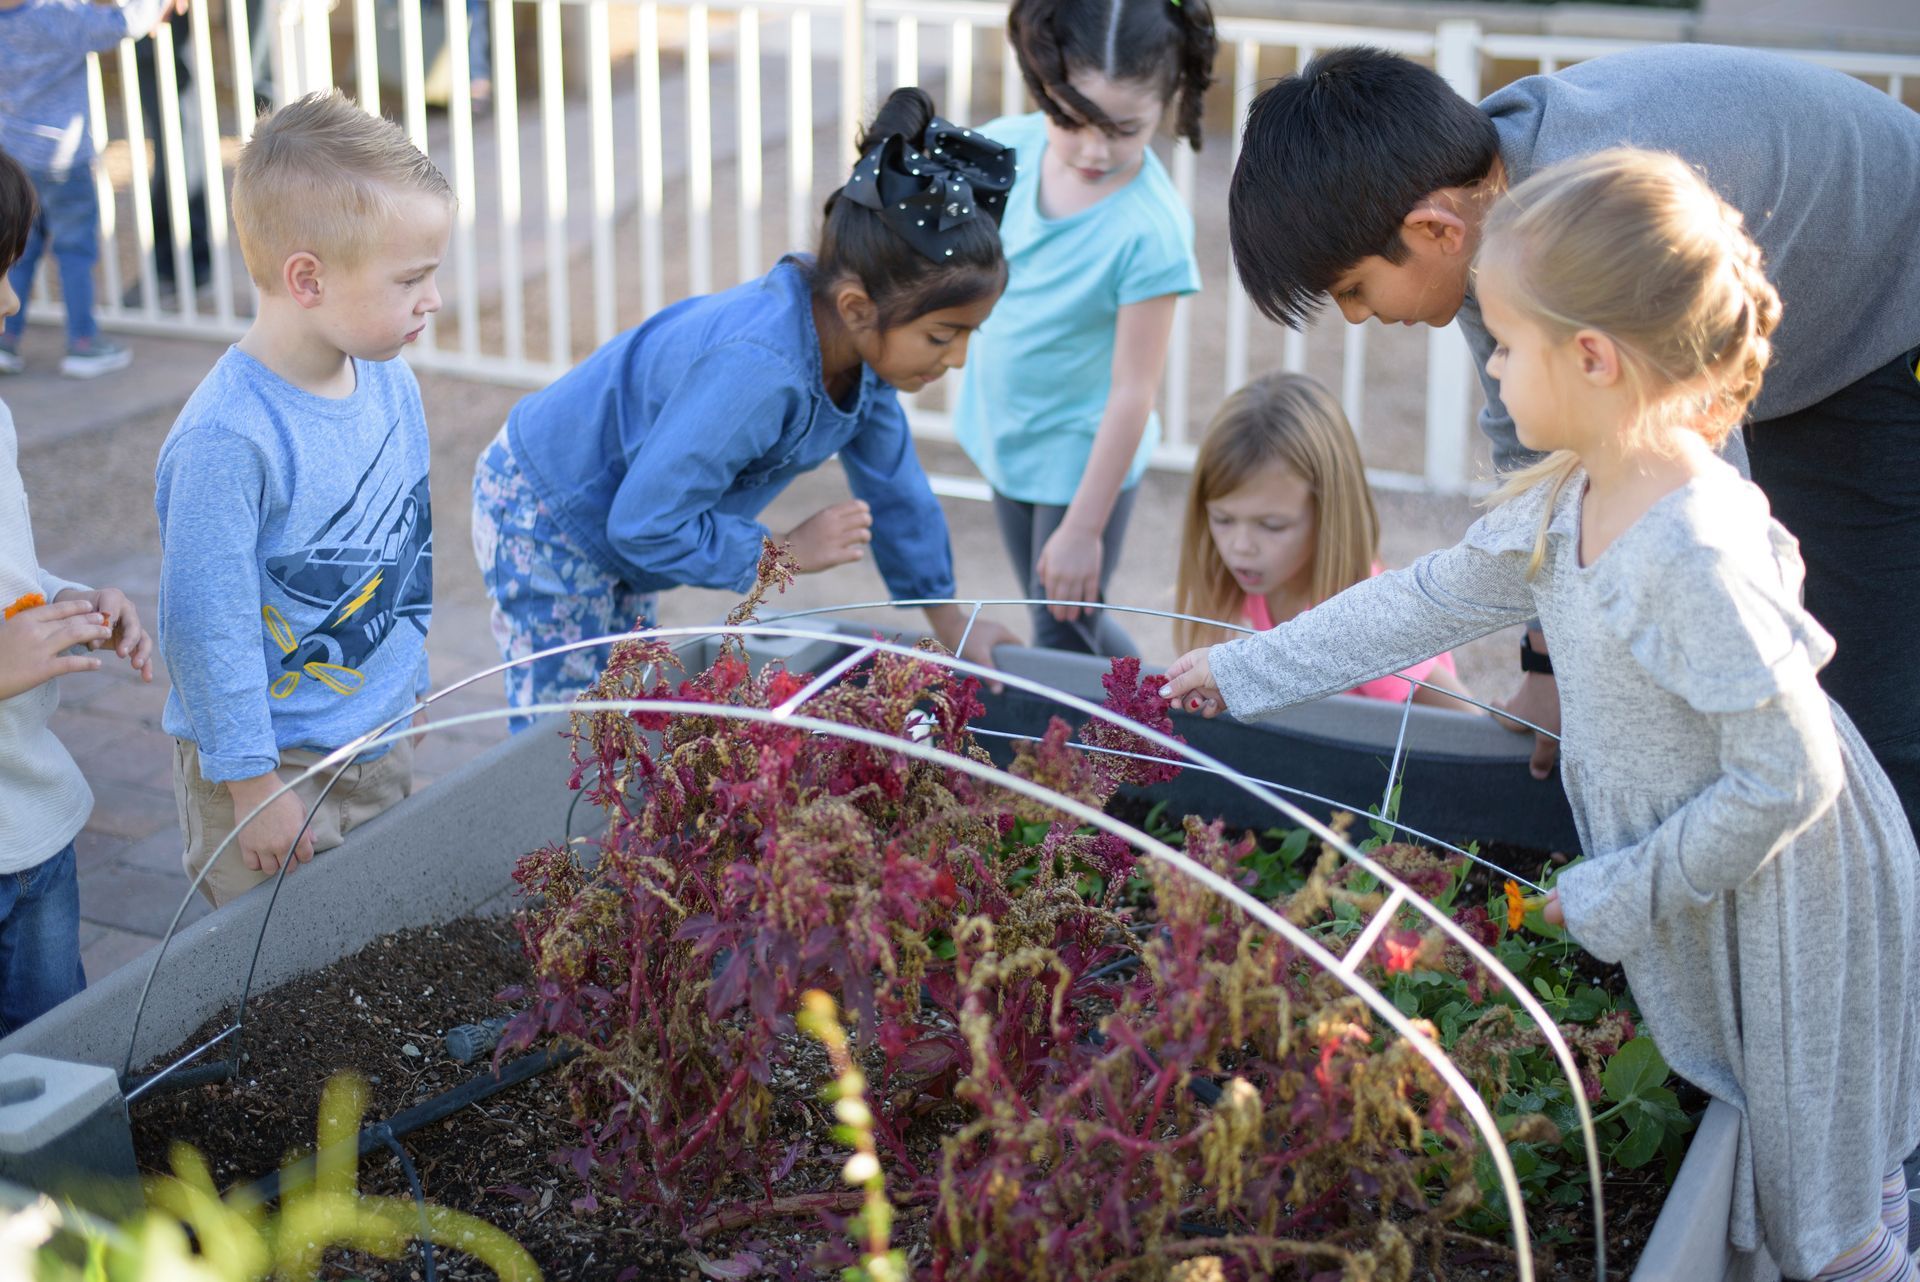 A group of montessori children are looking at plants in a garden.